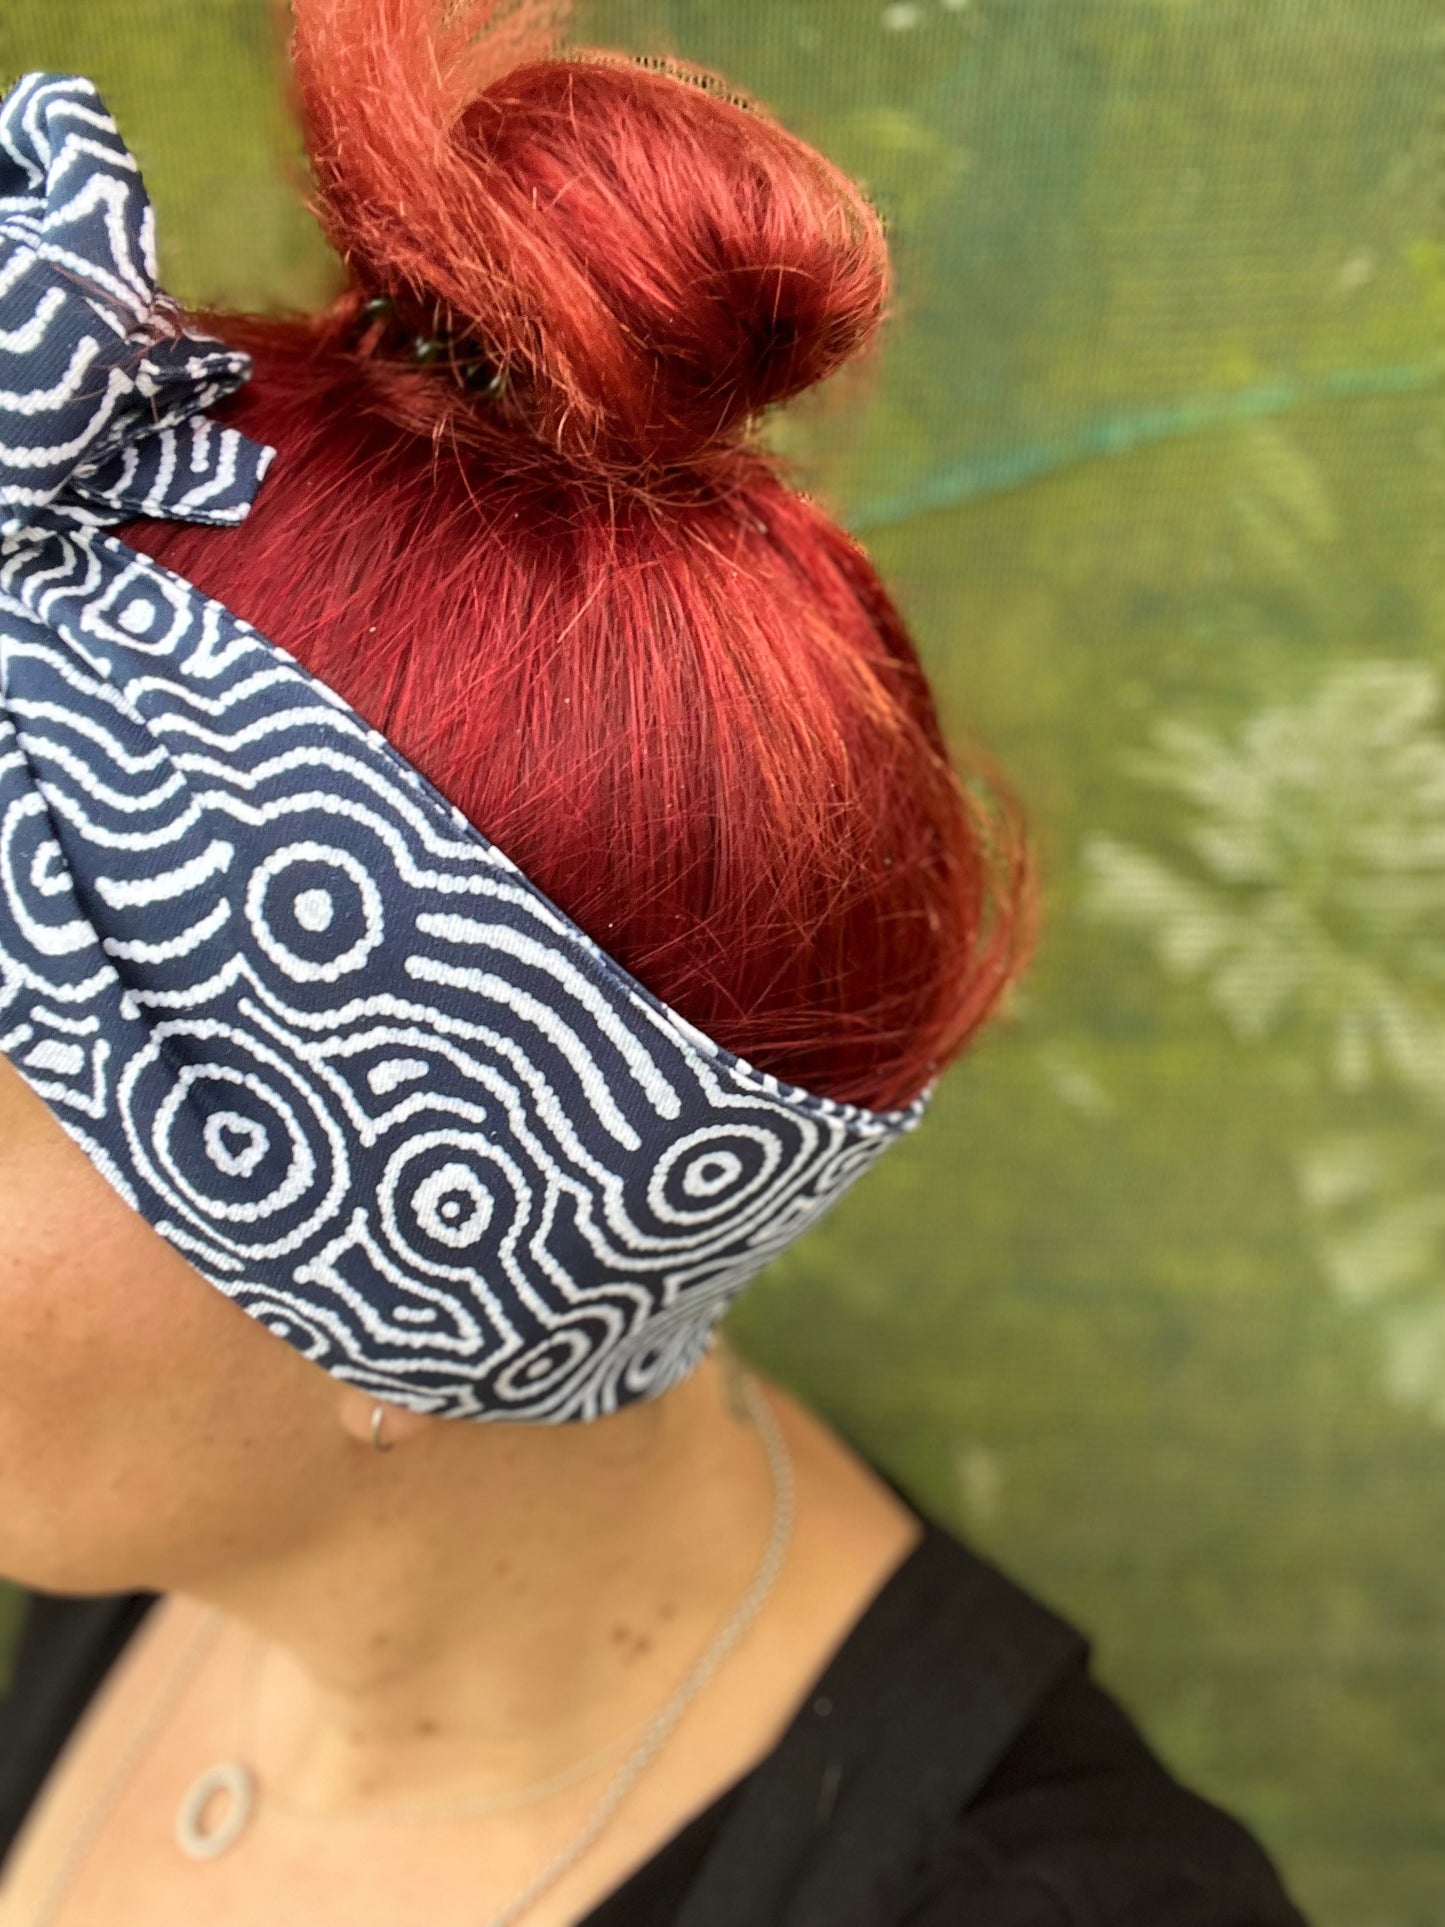 Water Dreaming Boho Wire Headband - Bae Bands Australia Twist Bow Wire Headband allows for your headband to stay in place all day with no headaches,